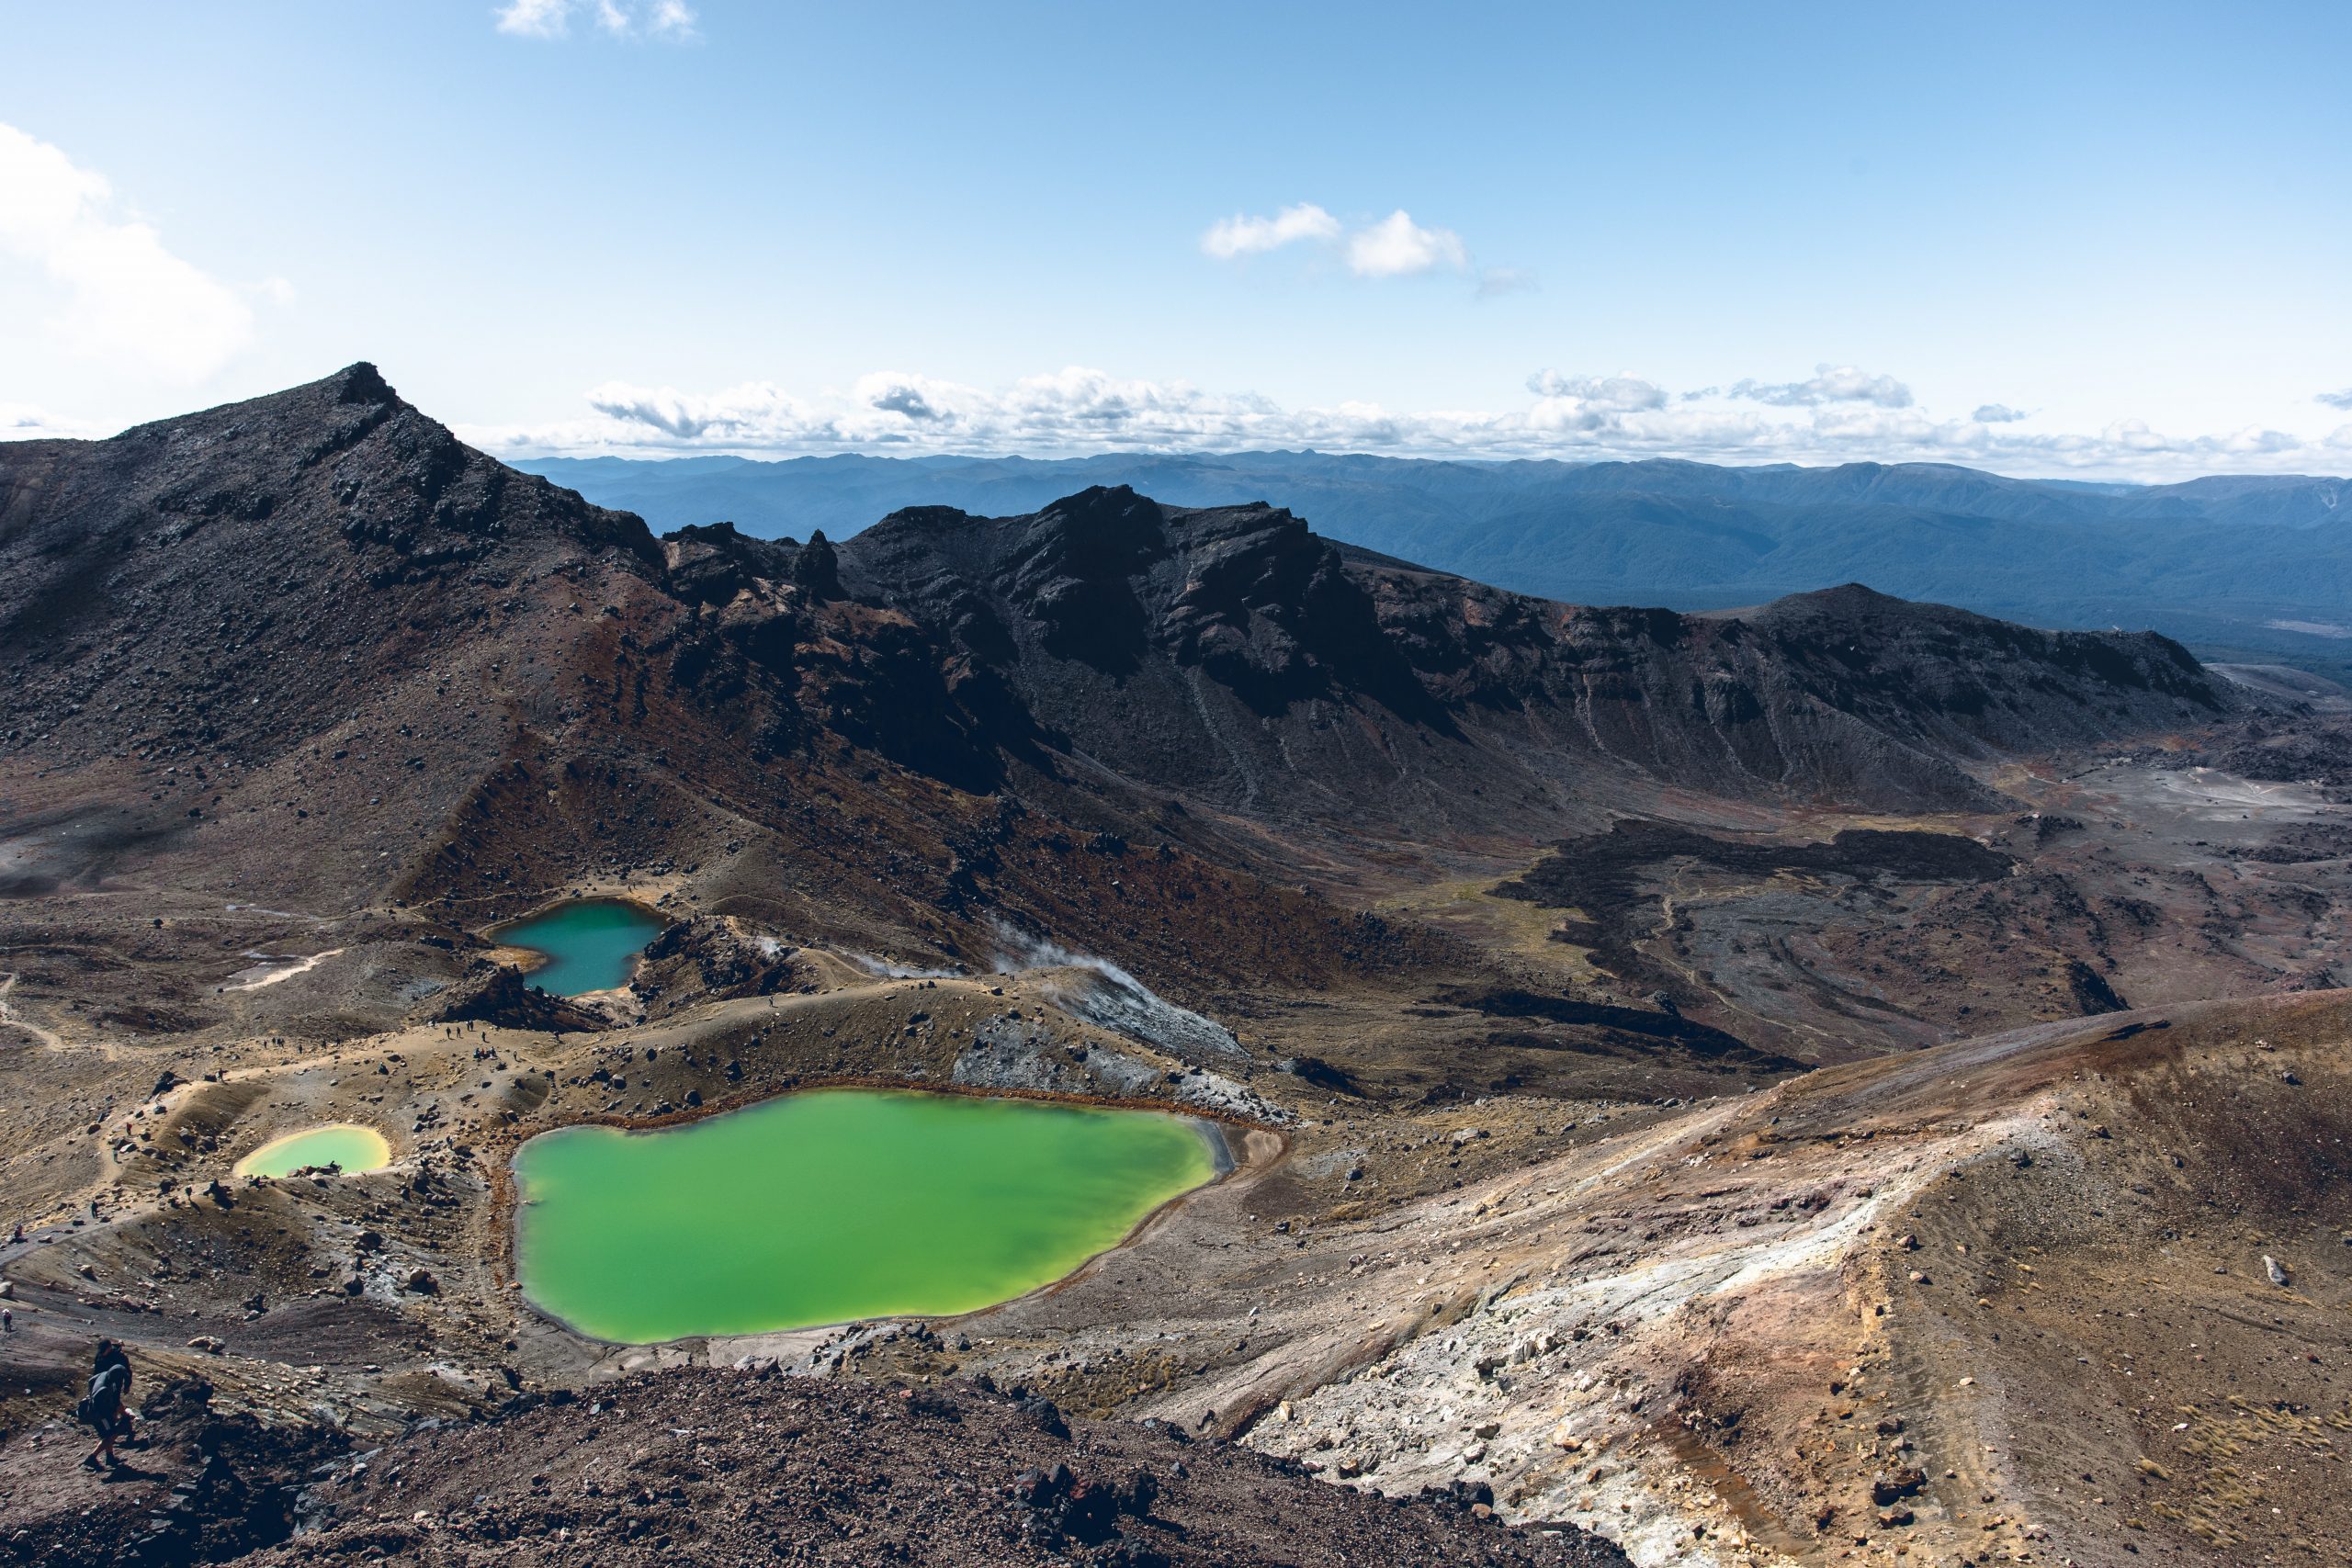 A rocky volcanic landscape of dark brown peaks and green lakes shown from a high viewpoint.